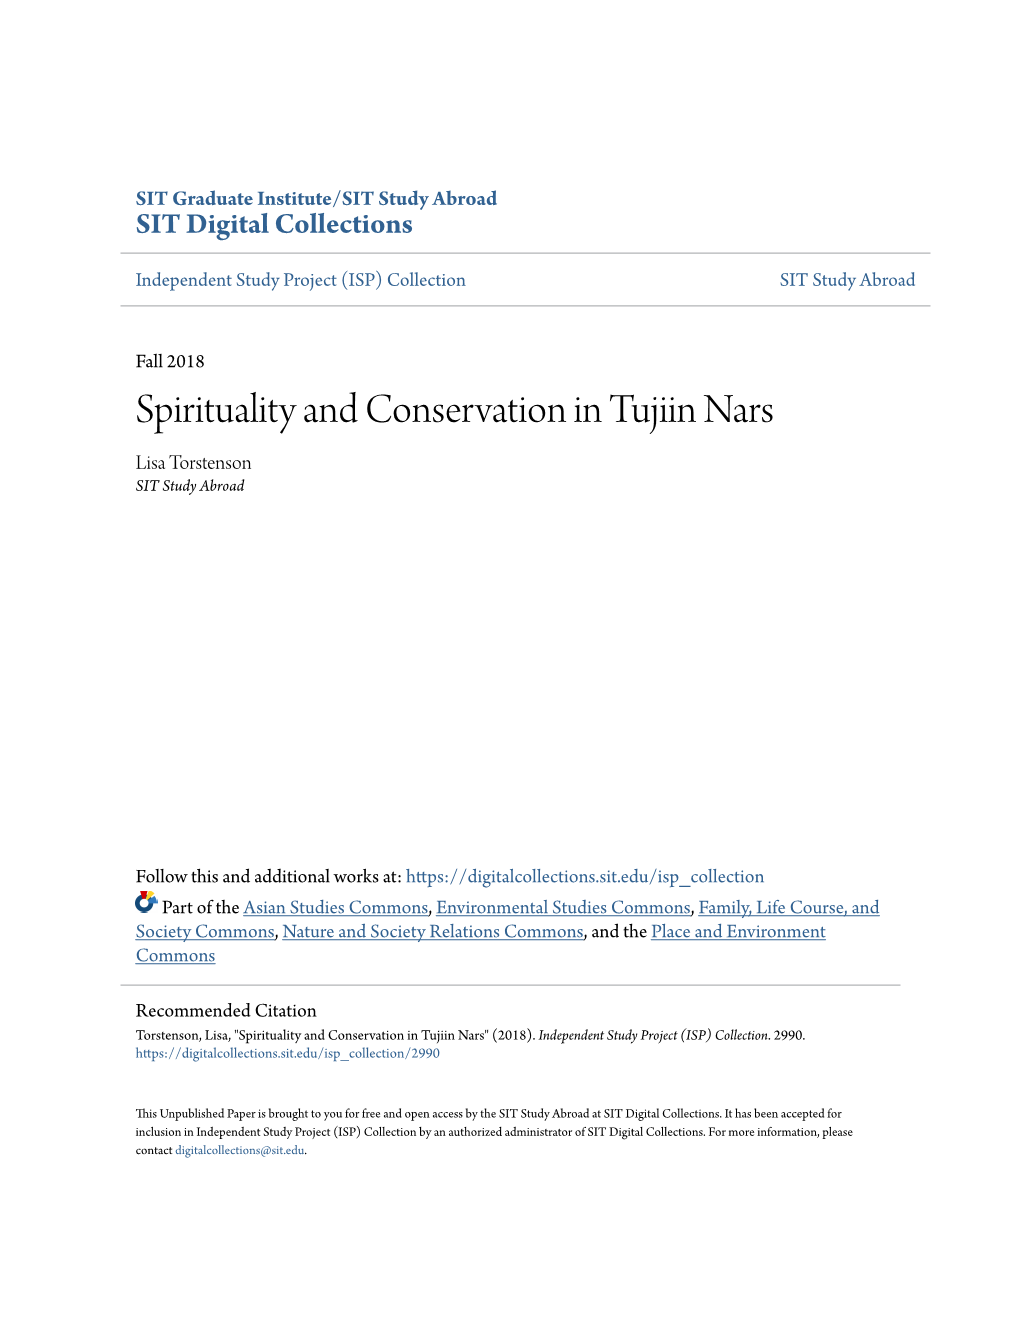 Spirituality and Conservation in Tujiin Nars Lisa Torstenson SIT Study Abroad